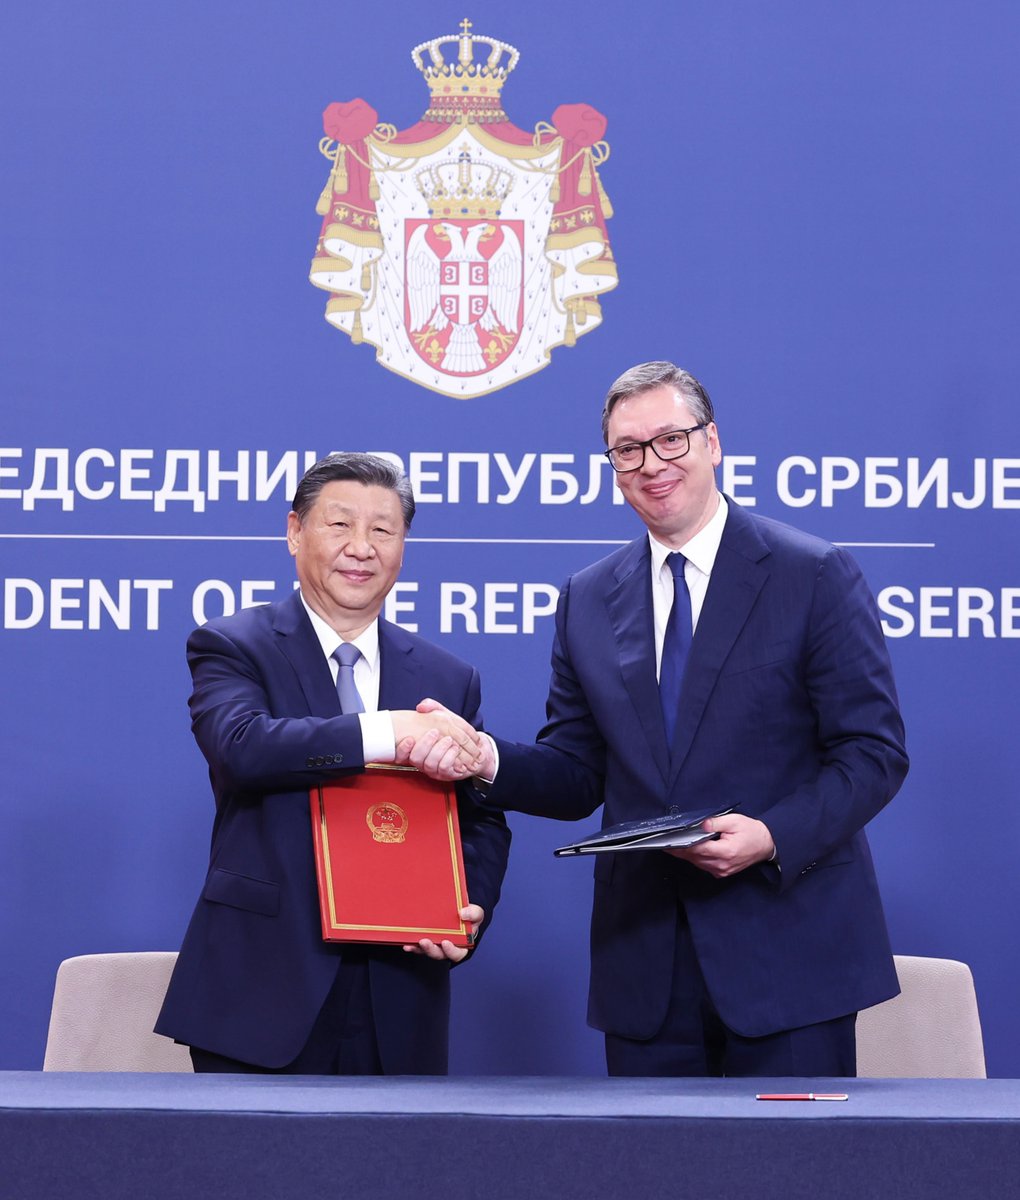 President Xi Jinping announced the first batch of six practical steps China will take to support the building of a China-Serbia community with a shared future in the new era. 1⃣ The China-Serbia Free Trade Agreement will take effect on July 1 this year. 2⃣ China supports Serbia…